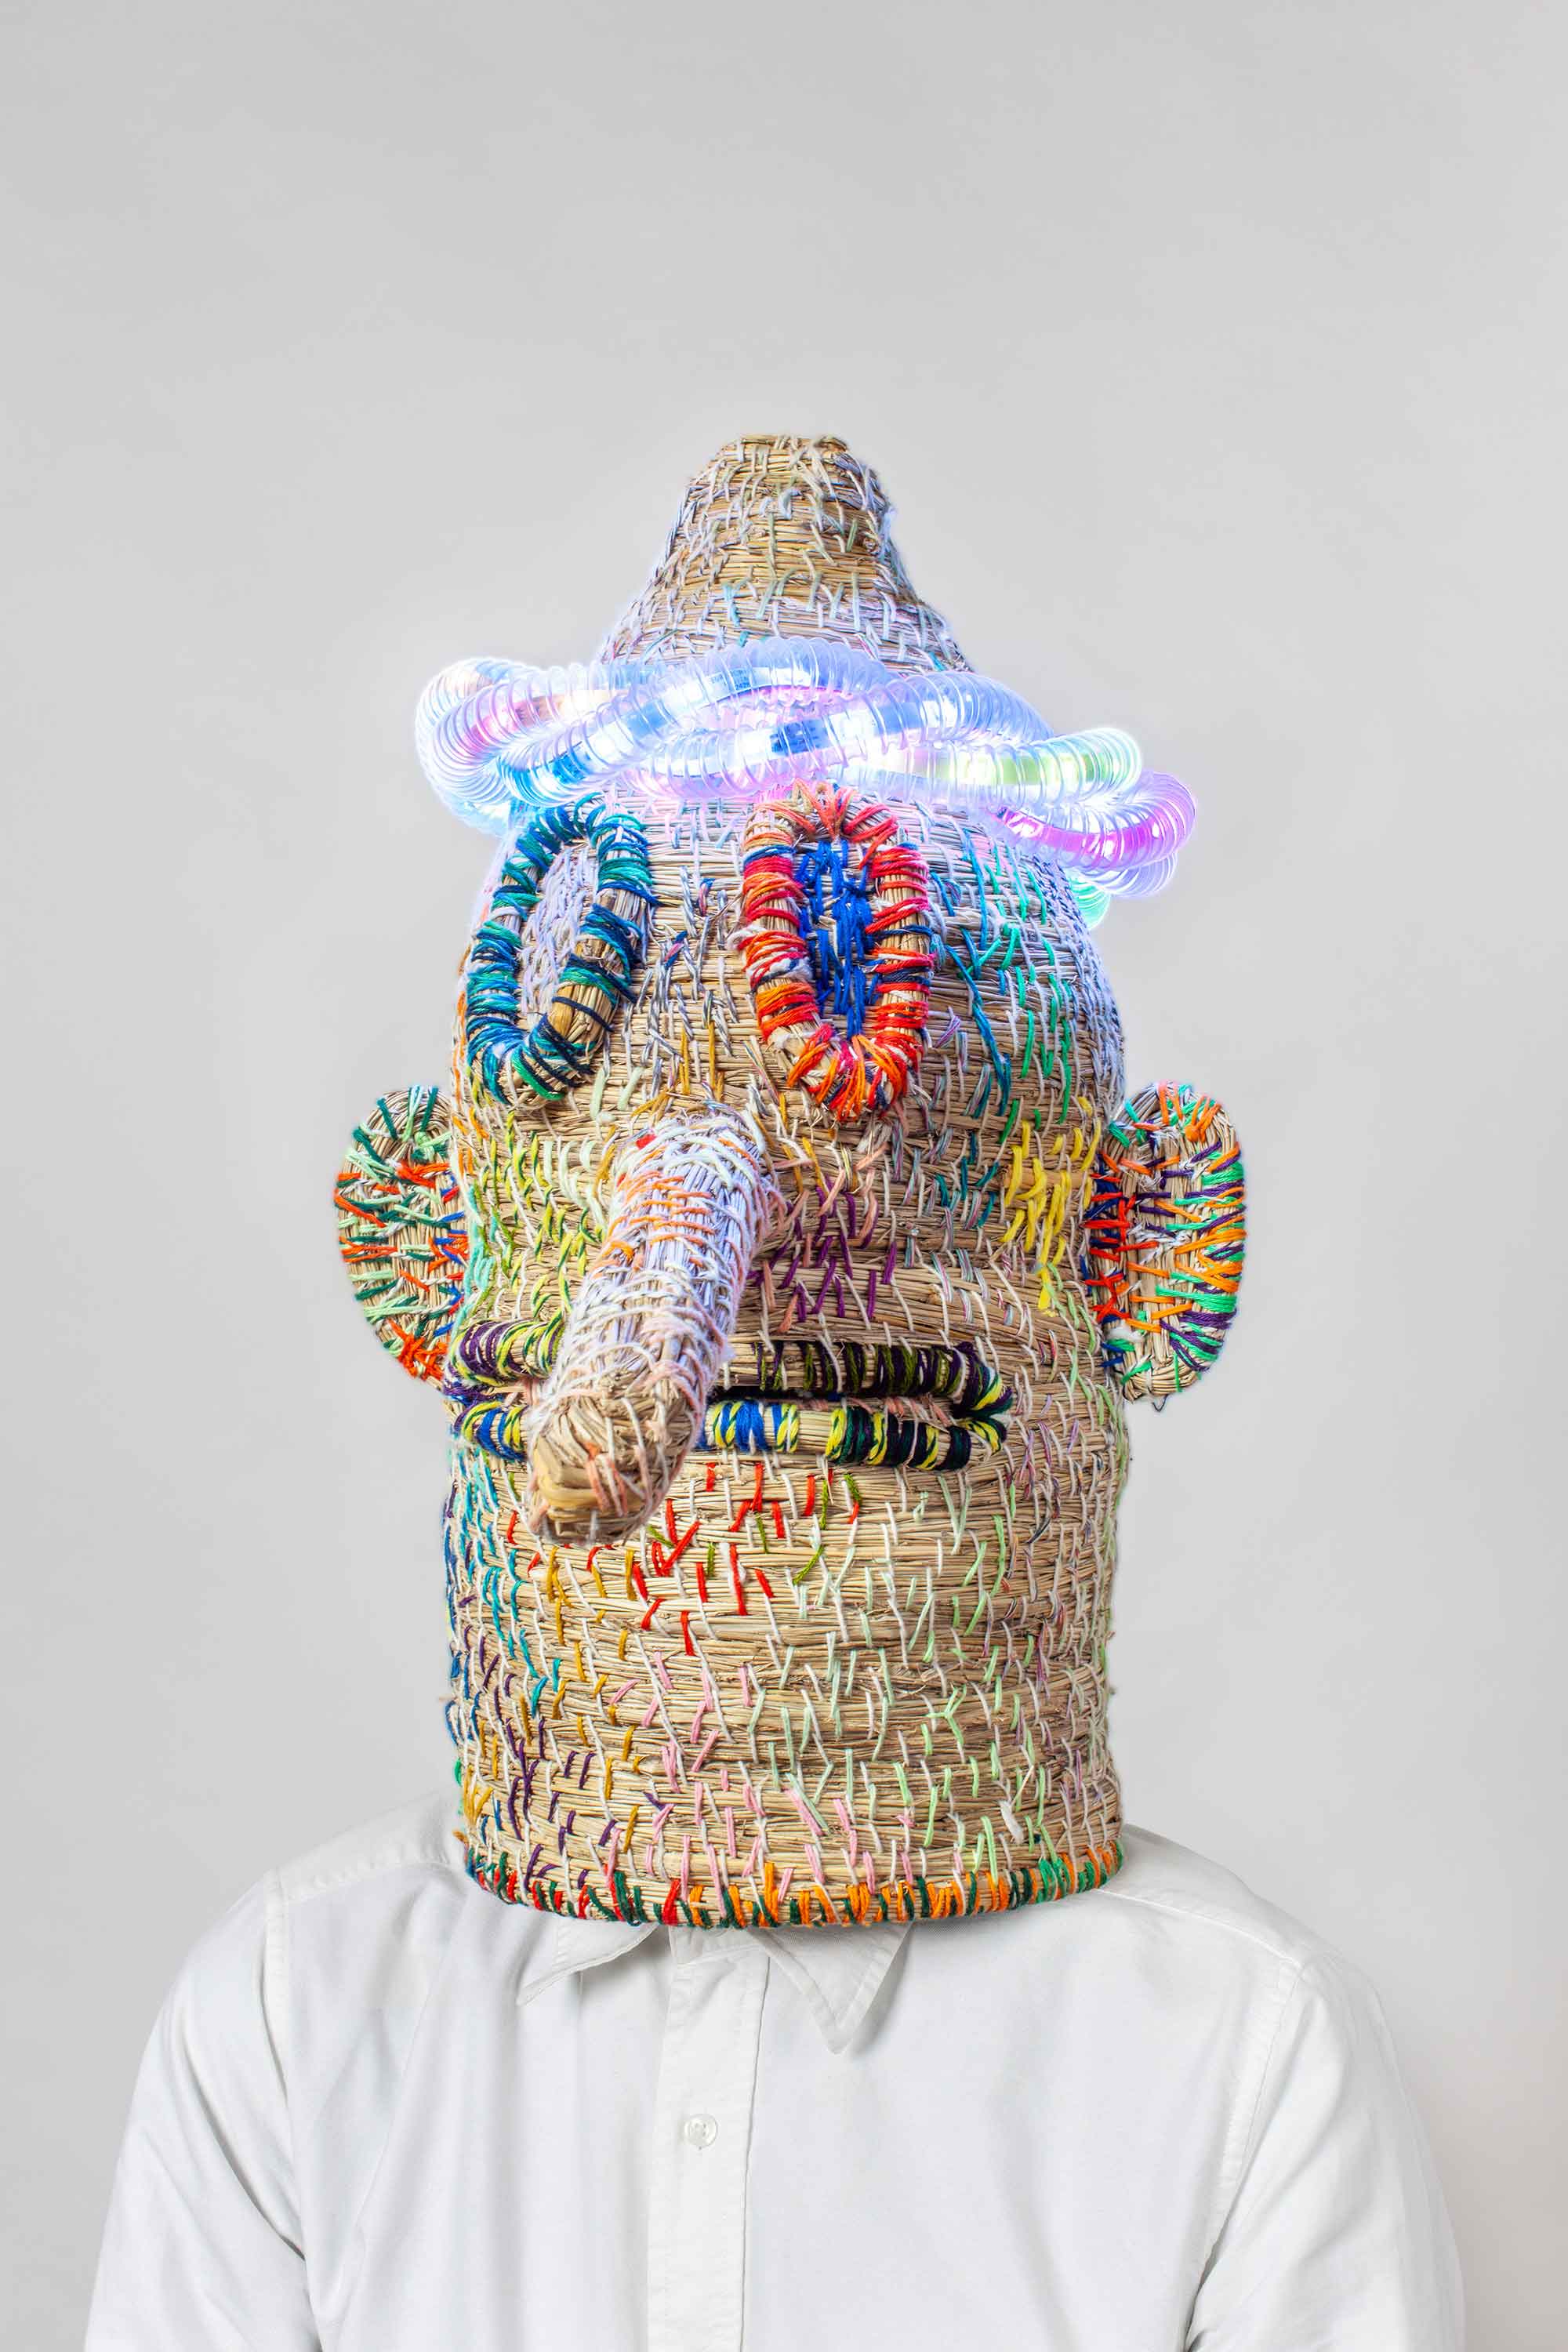 bertjan-pot-s-lights-masks-is-an-experiment-in-material-and-form